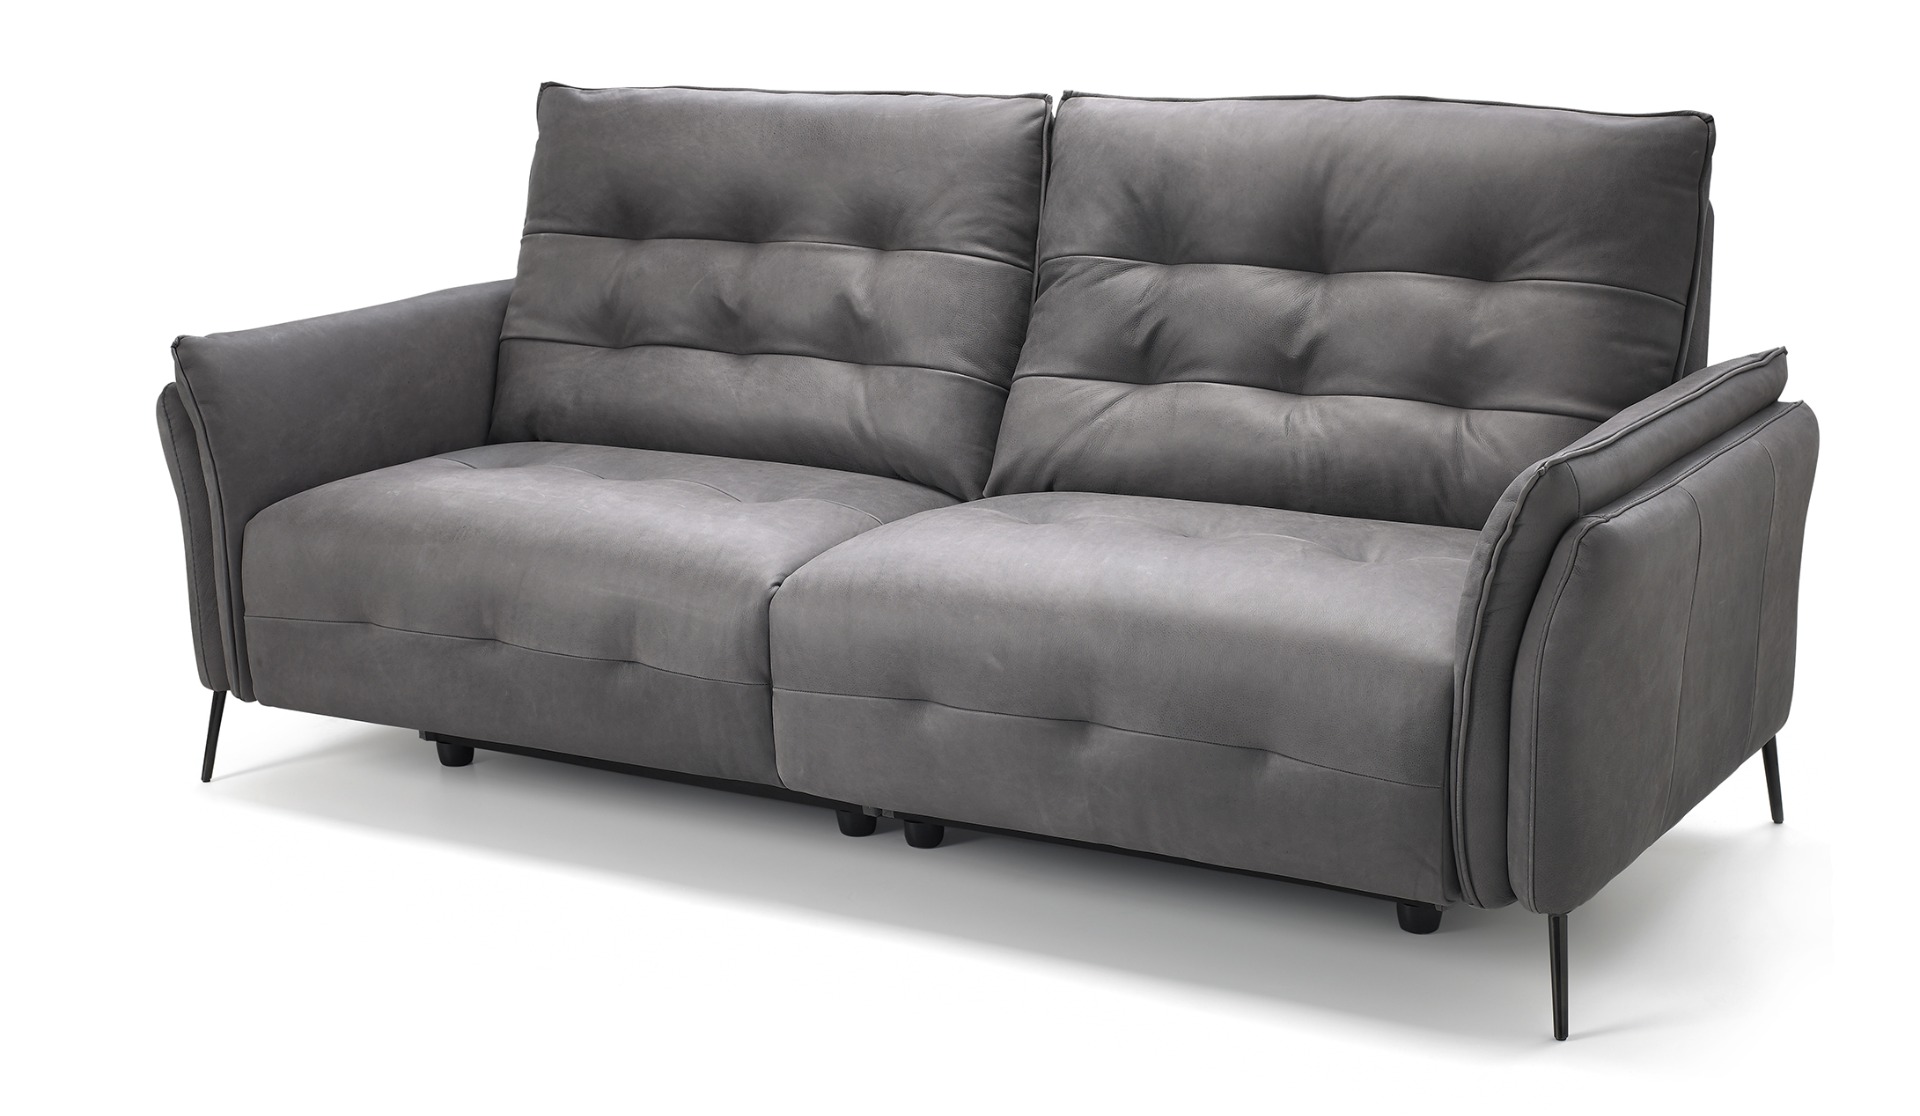 Bolanzo Sofa - Large 2 Recliners 233cm